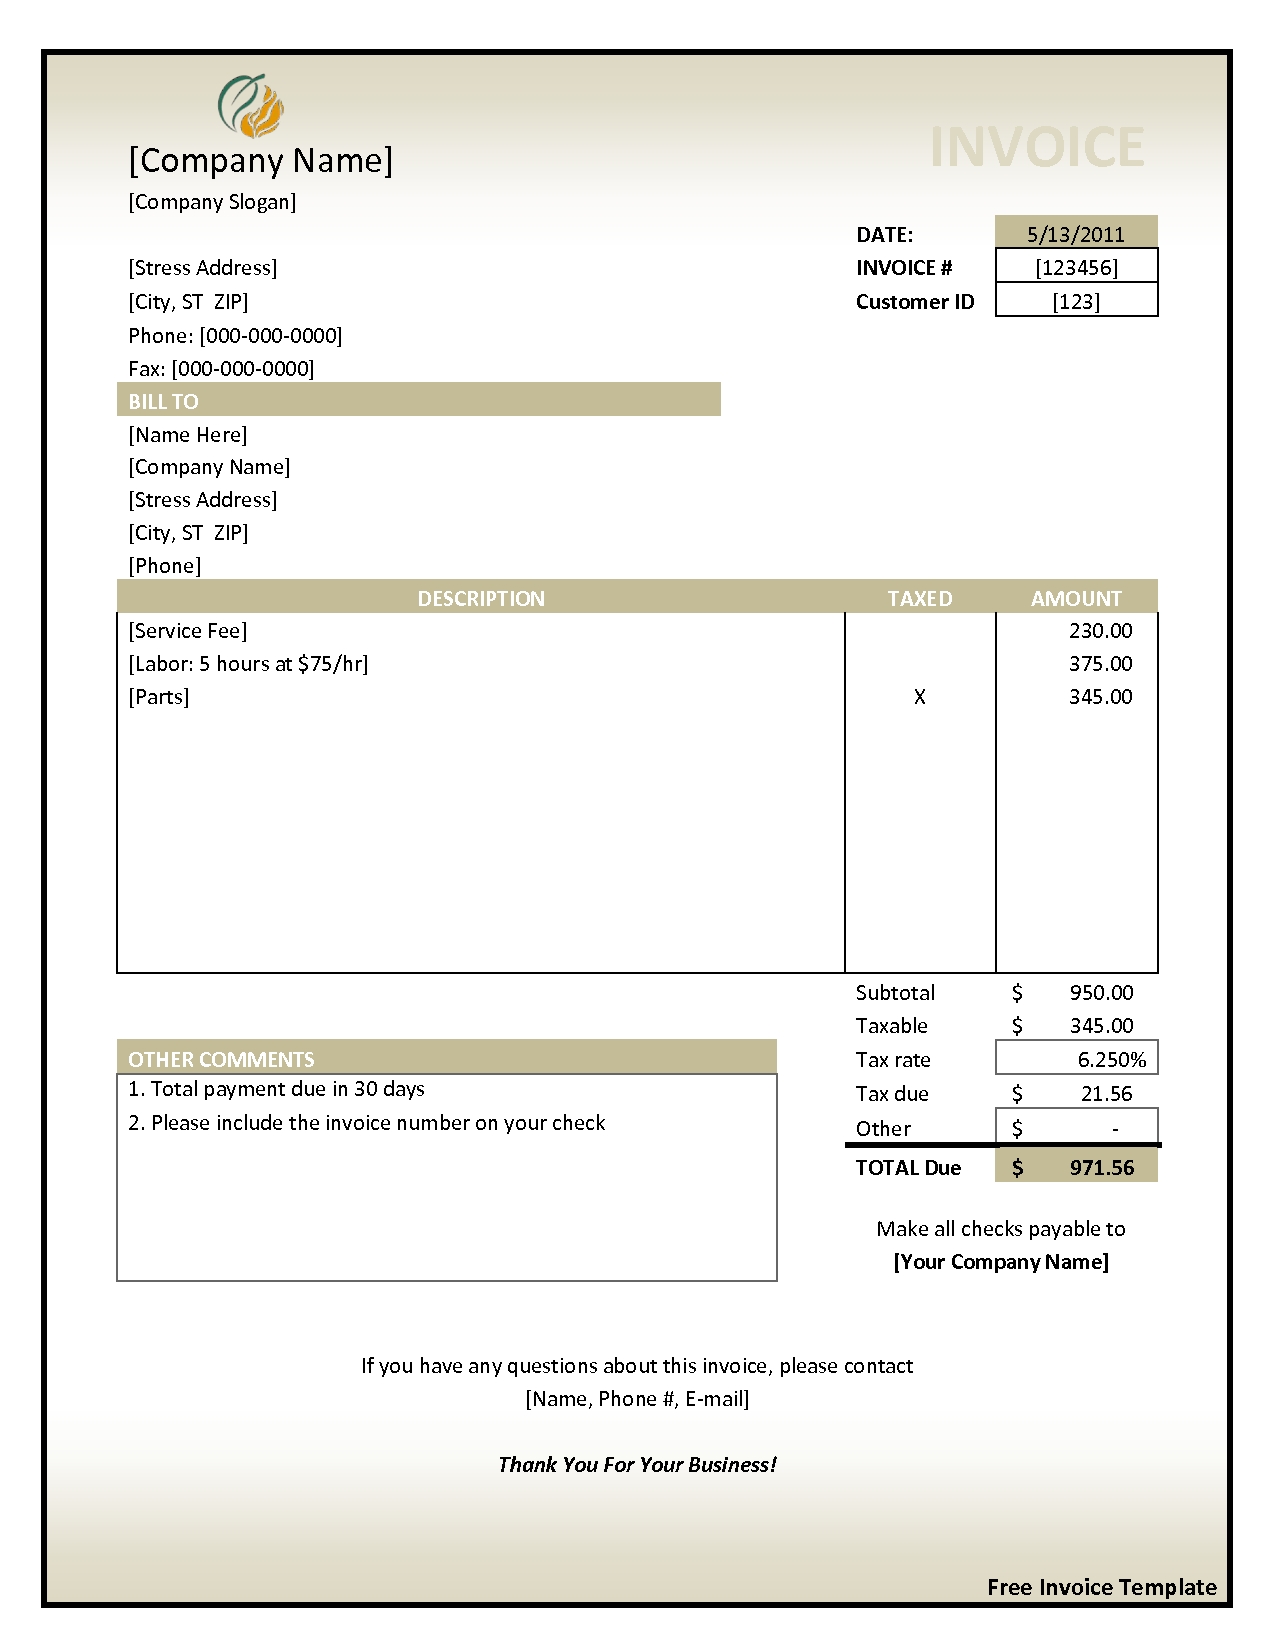 invoice format free free printable invoice template sample free download invoice template